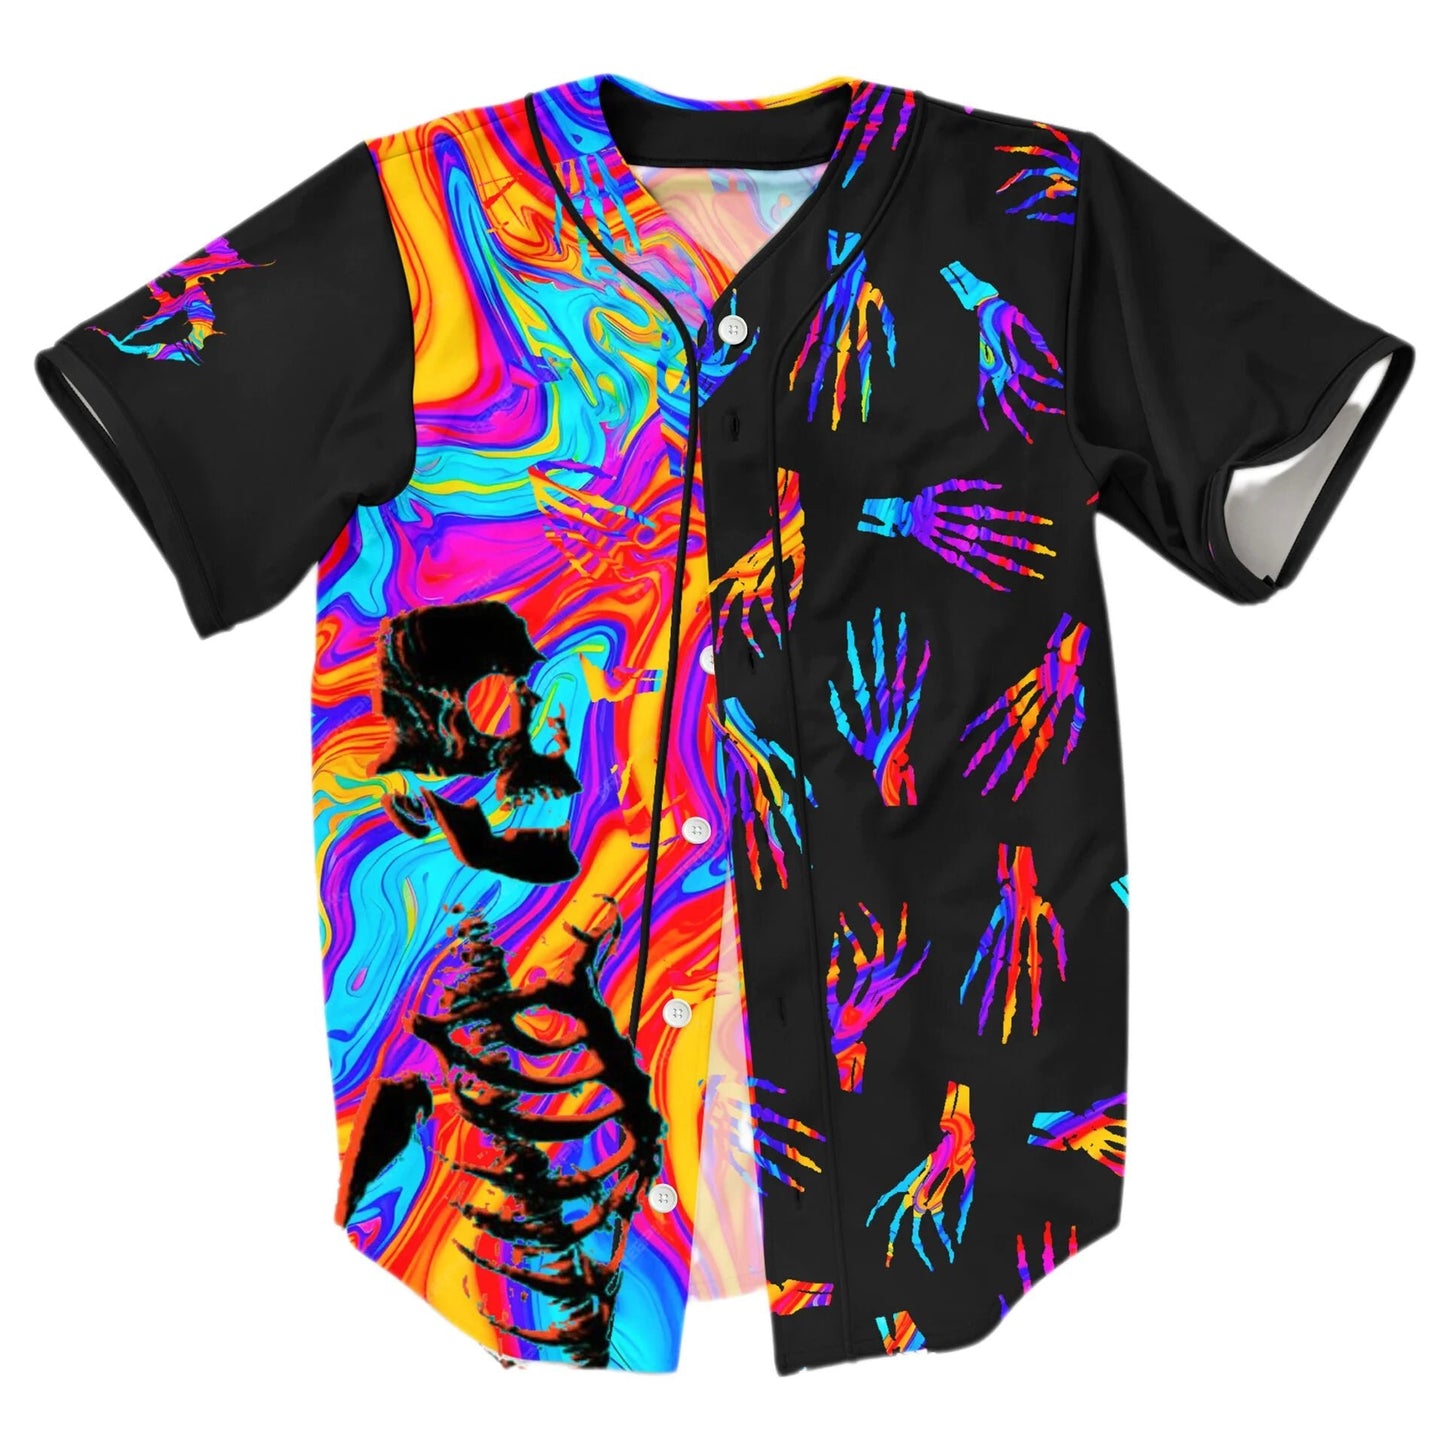 Zeds Dead Trippy Dry Hands Baseball Jersey - The Rave Cave